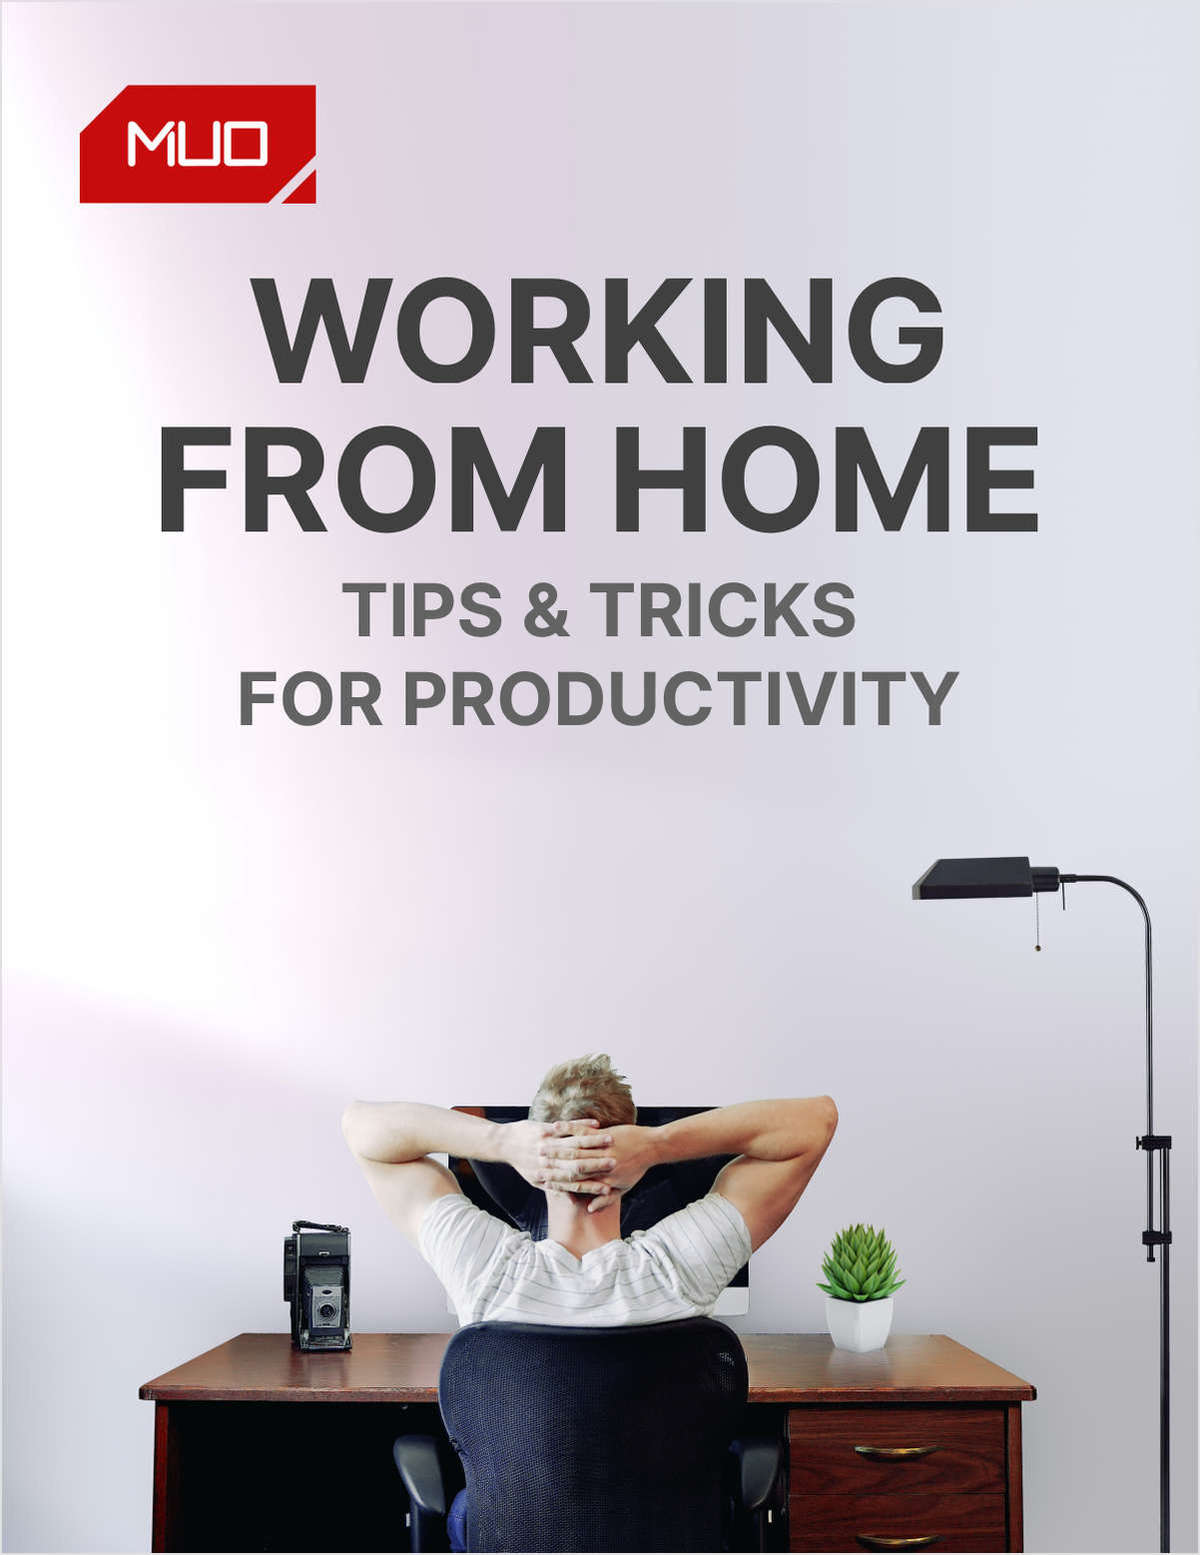 w make465c8 - 90 Ways to Stay Productive and Motivated When Working From Home